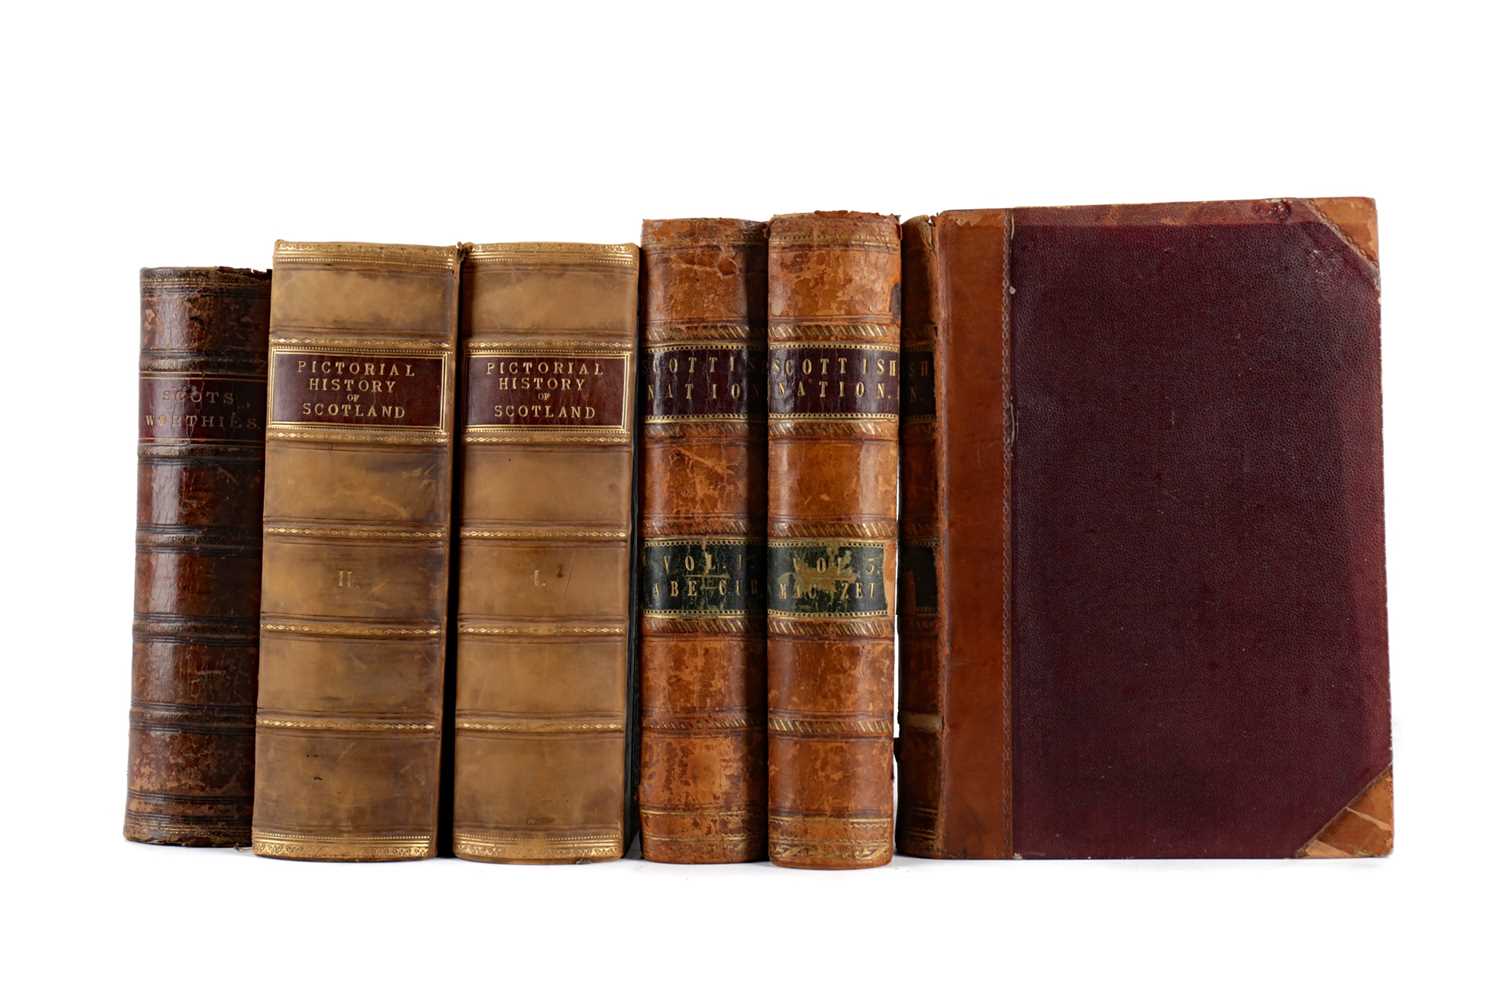 Lot 1105 - TWO VOLUMES OF THE PICTORIAL HISTORY OF SCOTLAND BY JAMES TAYLOR AND FOUR OTHER VOLUMES